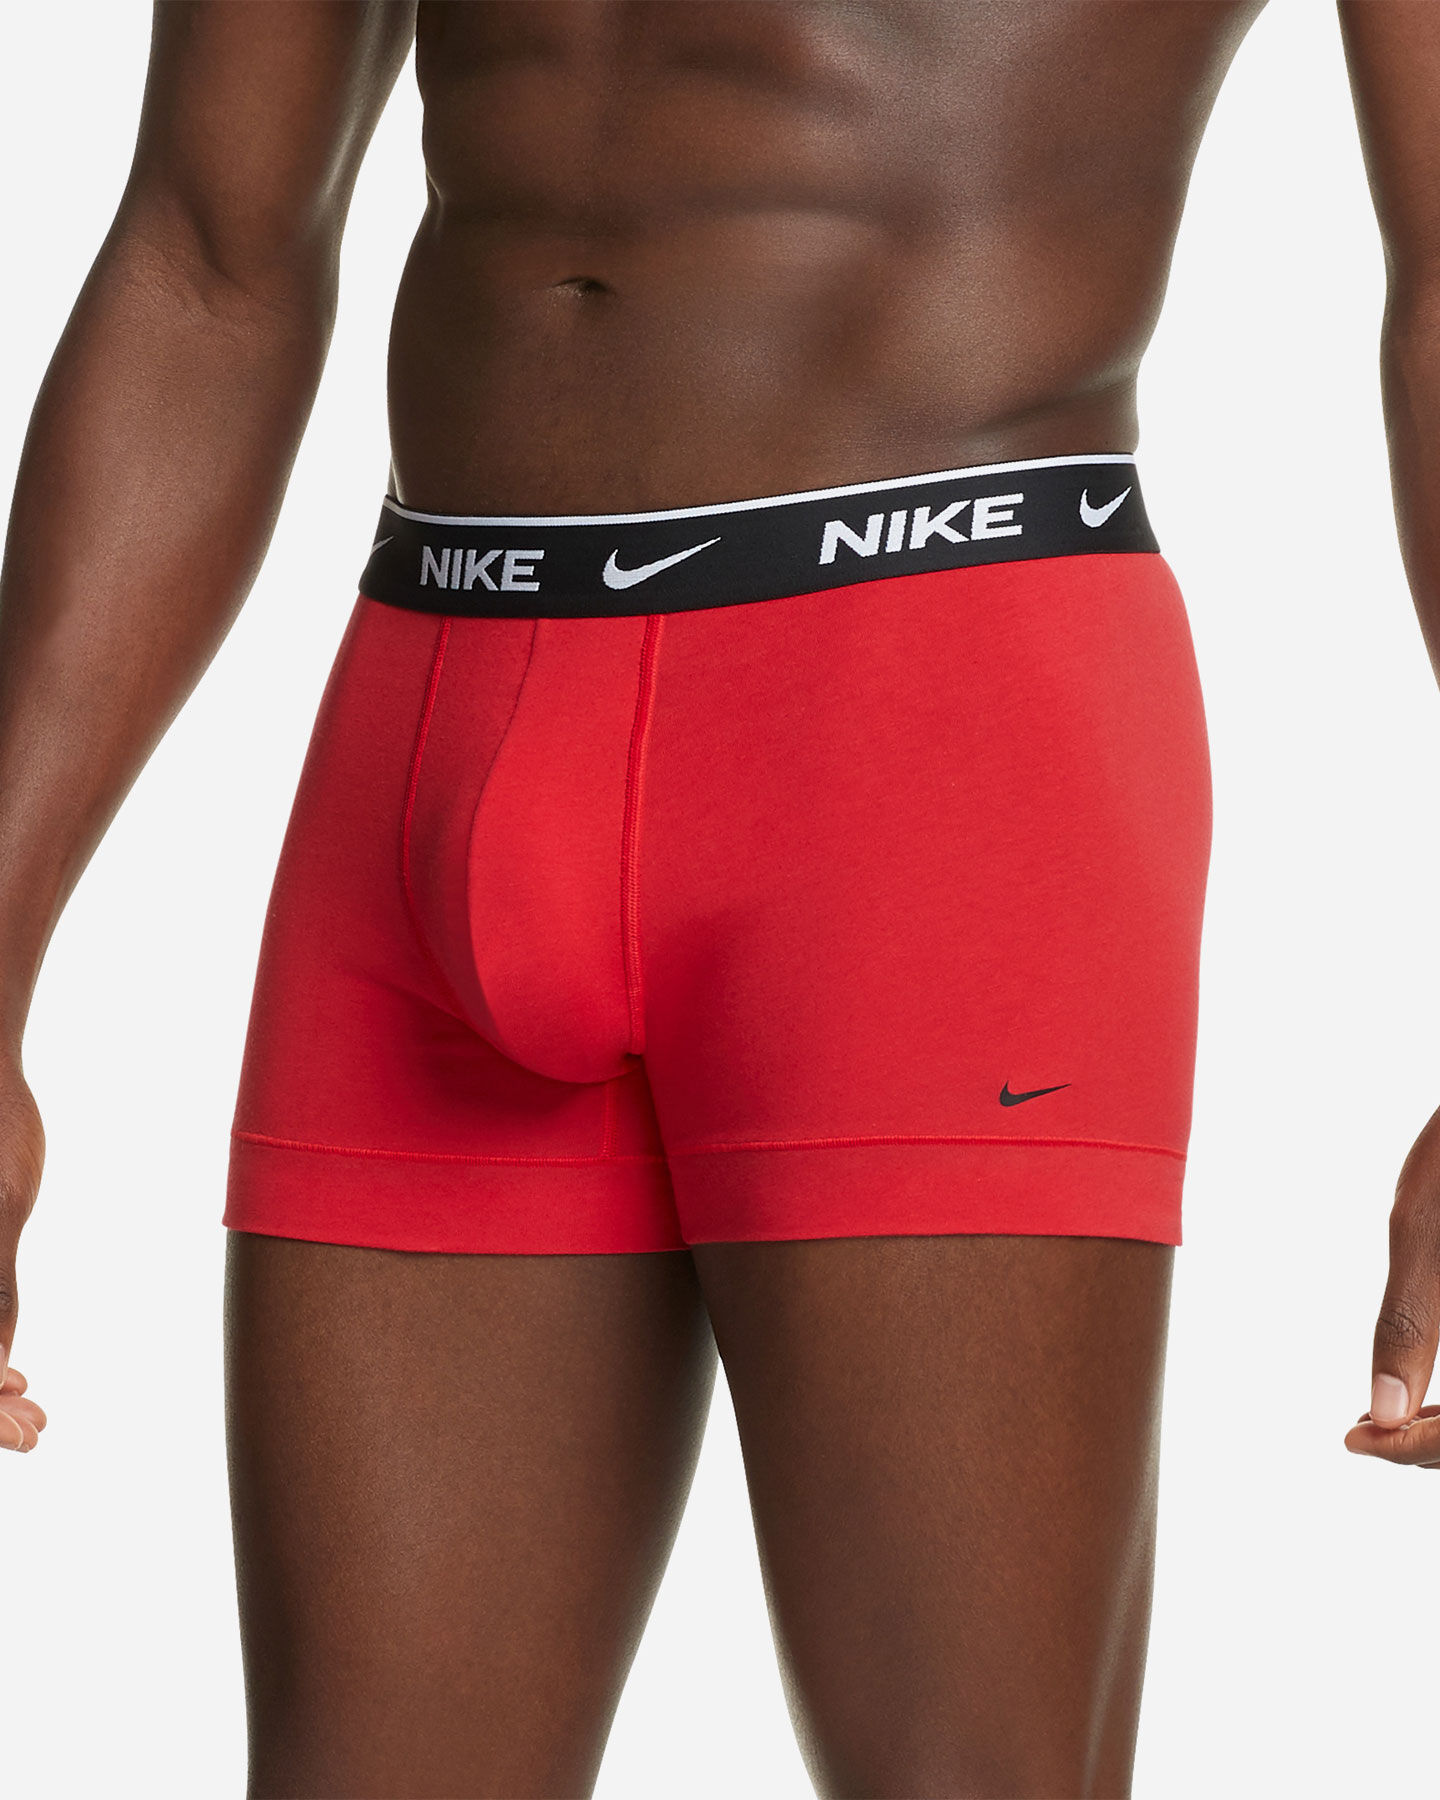  Intimo NIKE 2PACK BOXER EVERYDAY M S4095174|M14|XS scatto 1